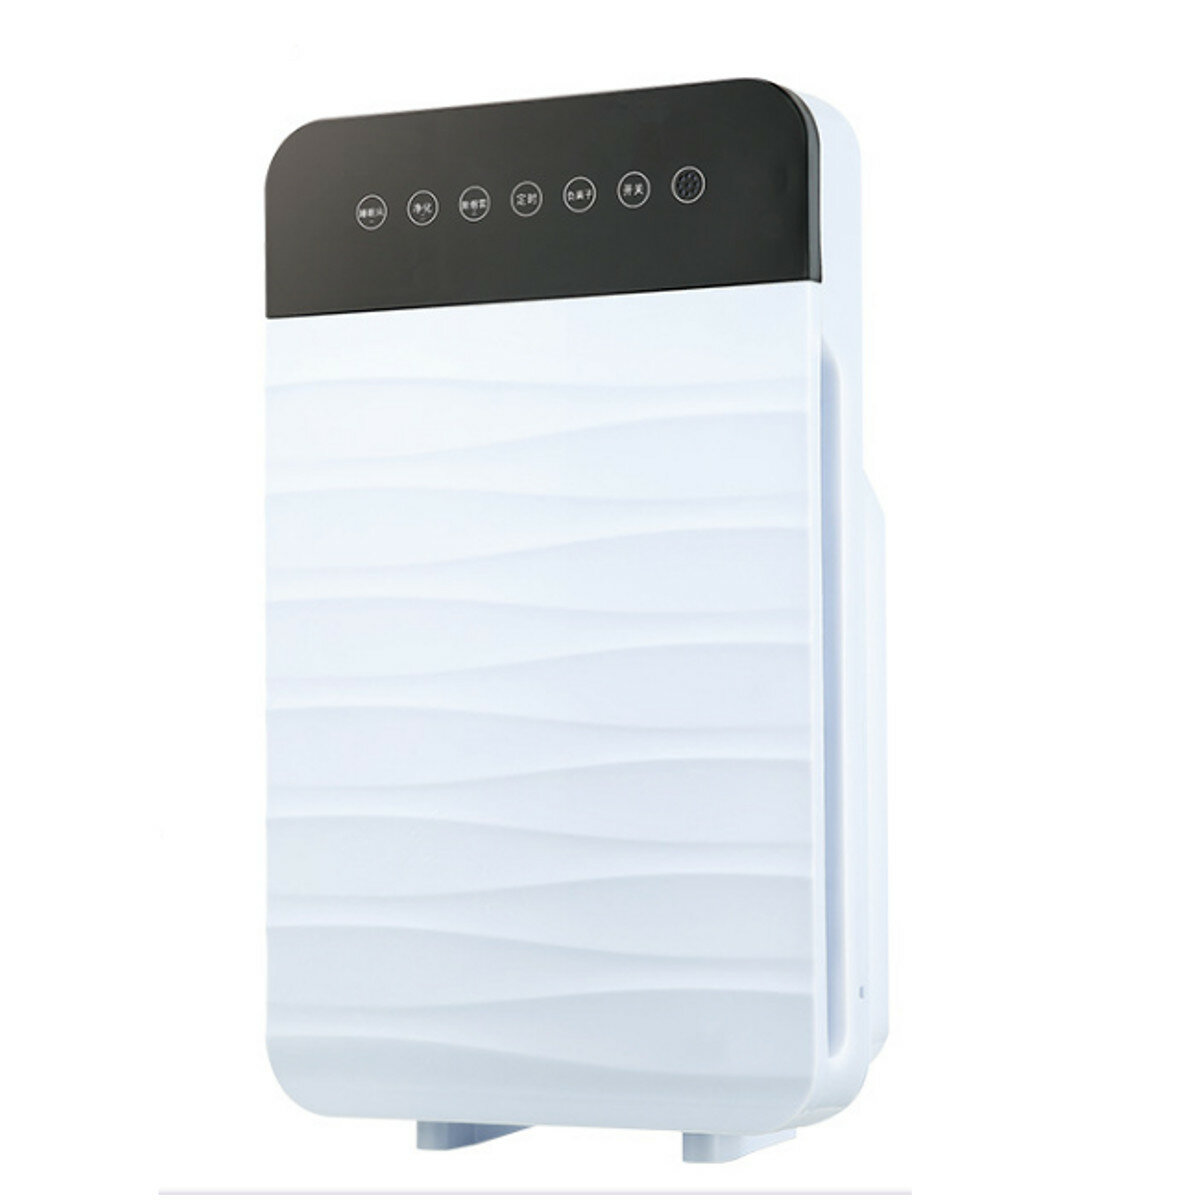 

Air Purifier 300m³/H Composite Filter Home PM2.5 Odor Smoke Dust Cleaner +Remote Controller